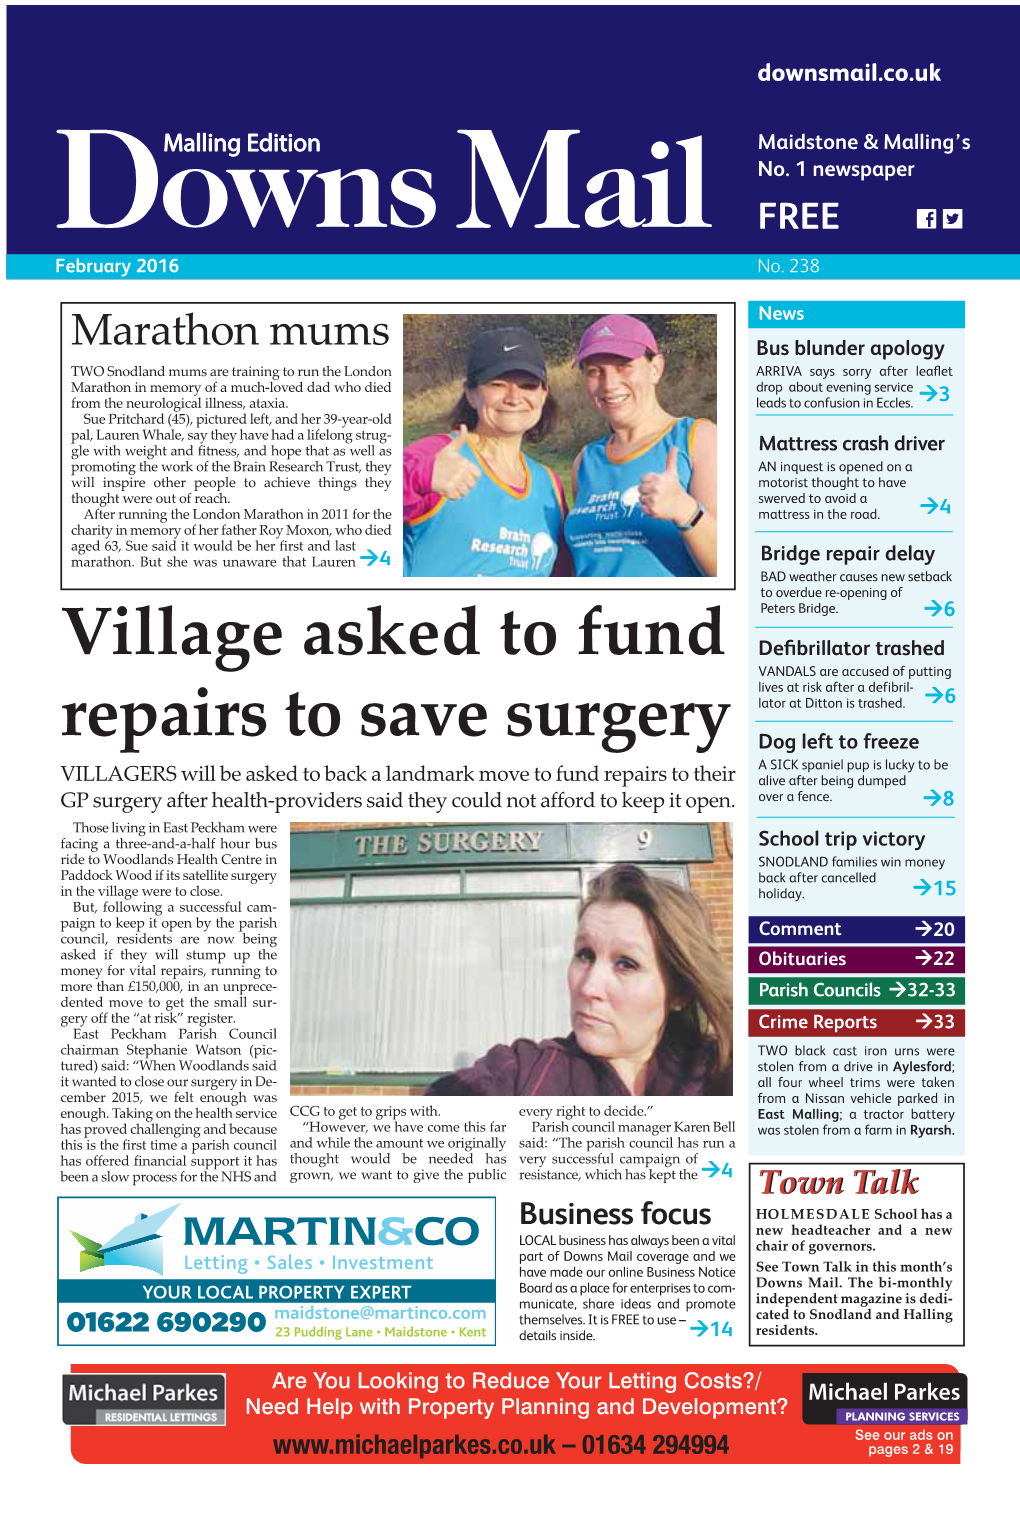 Village Asked to Fund Repairs to Save Surgery